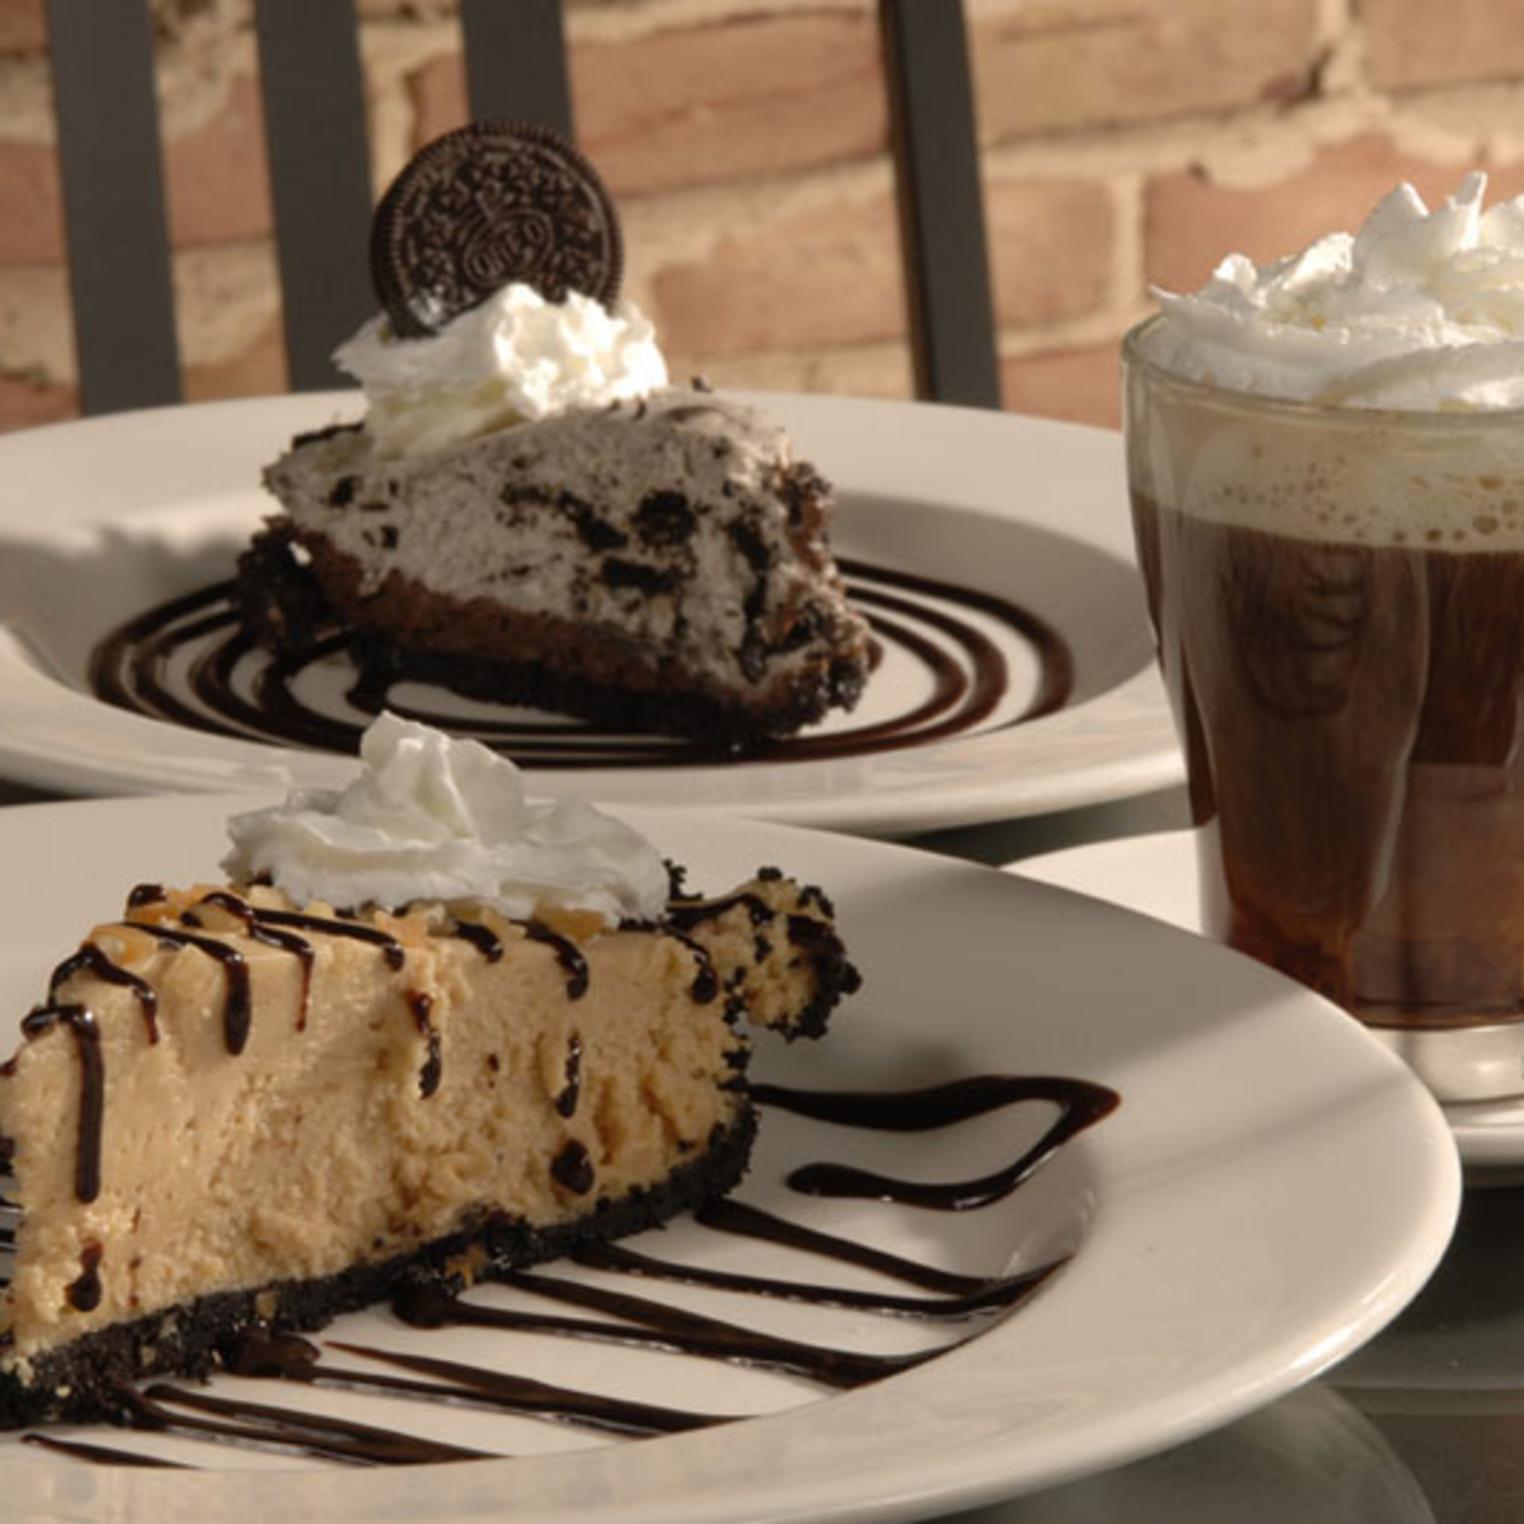 Desserts at Pizza Grille